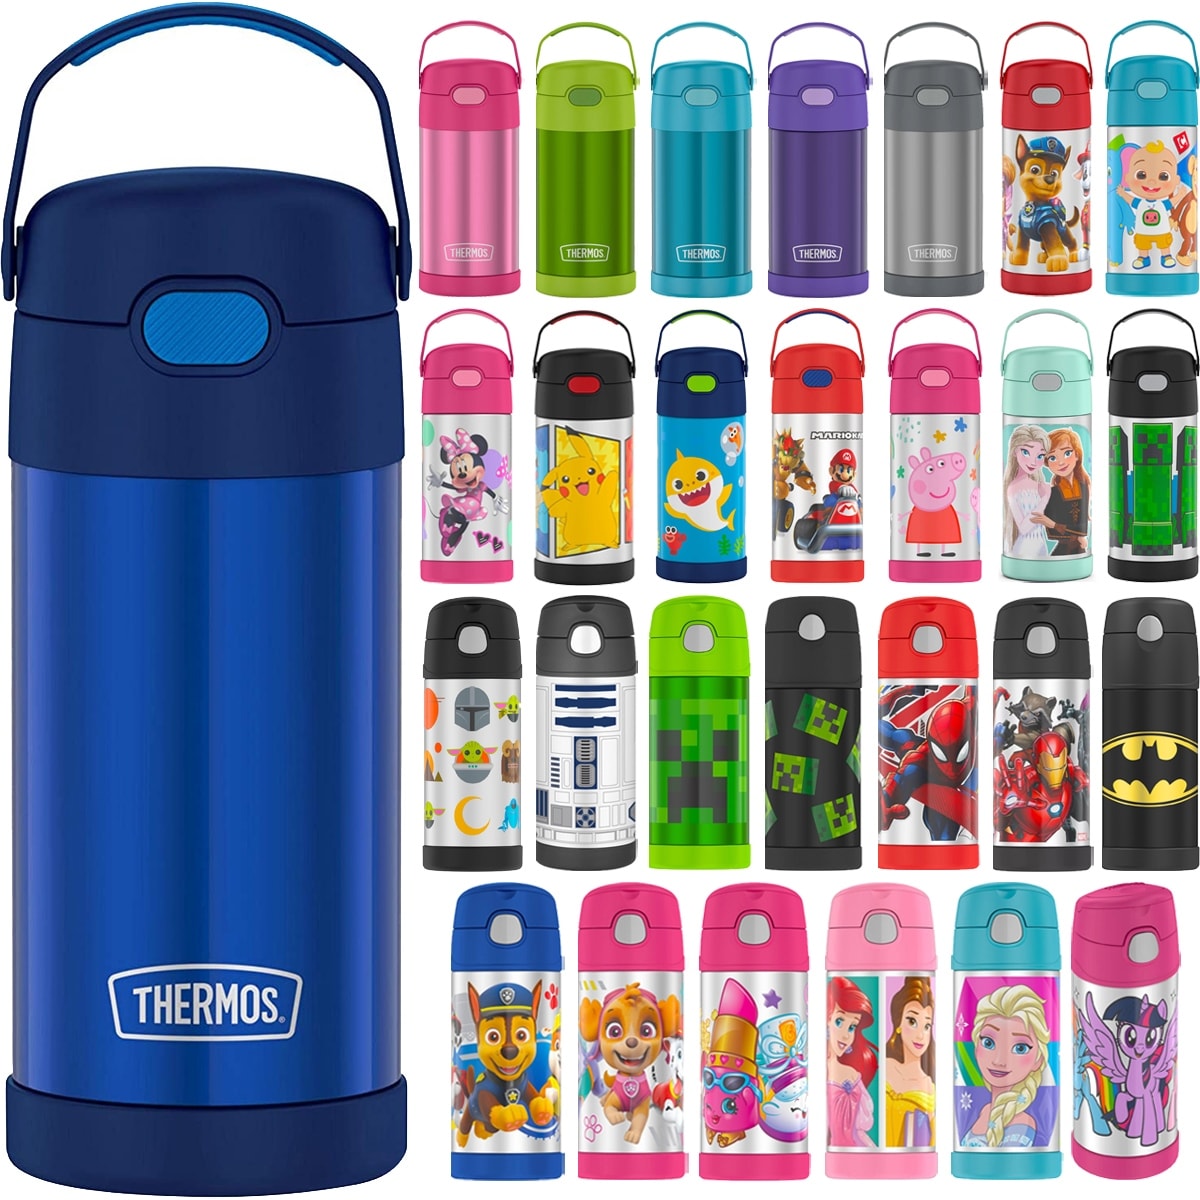 https://ak1.ostkcdn.com/images/products/is/images/direct/56e26a0a04290c3200eb49a77c3c9689f49462a4/Thermos-12-oz.-Kid%27s-Funtainer-Insulated-Stainless-Steel-Water-Bottle.jpg